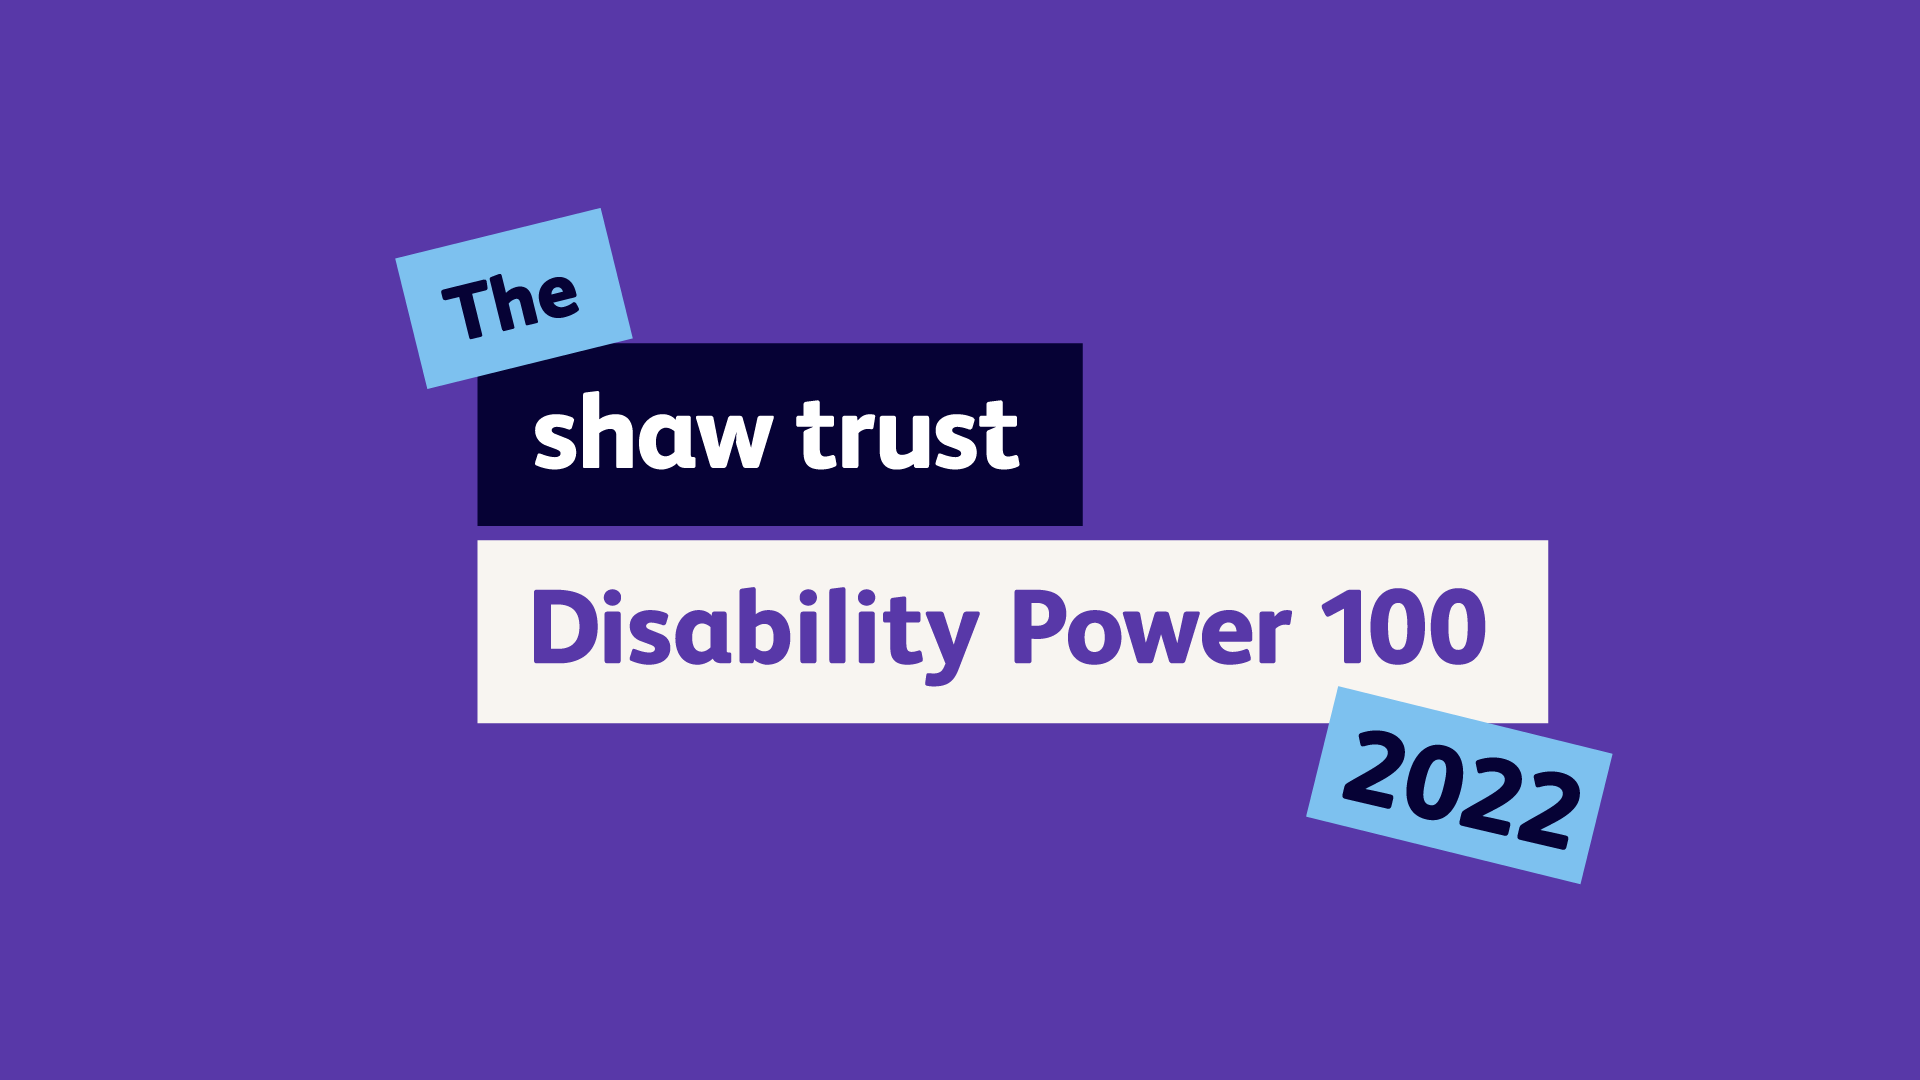 An image of the Power 100 2022 logo with a purple background